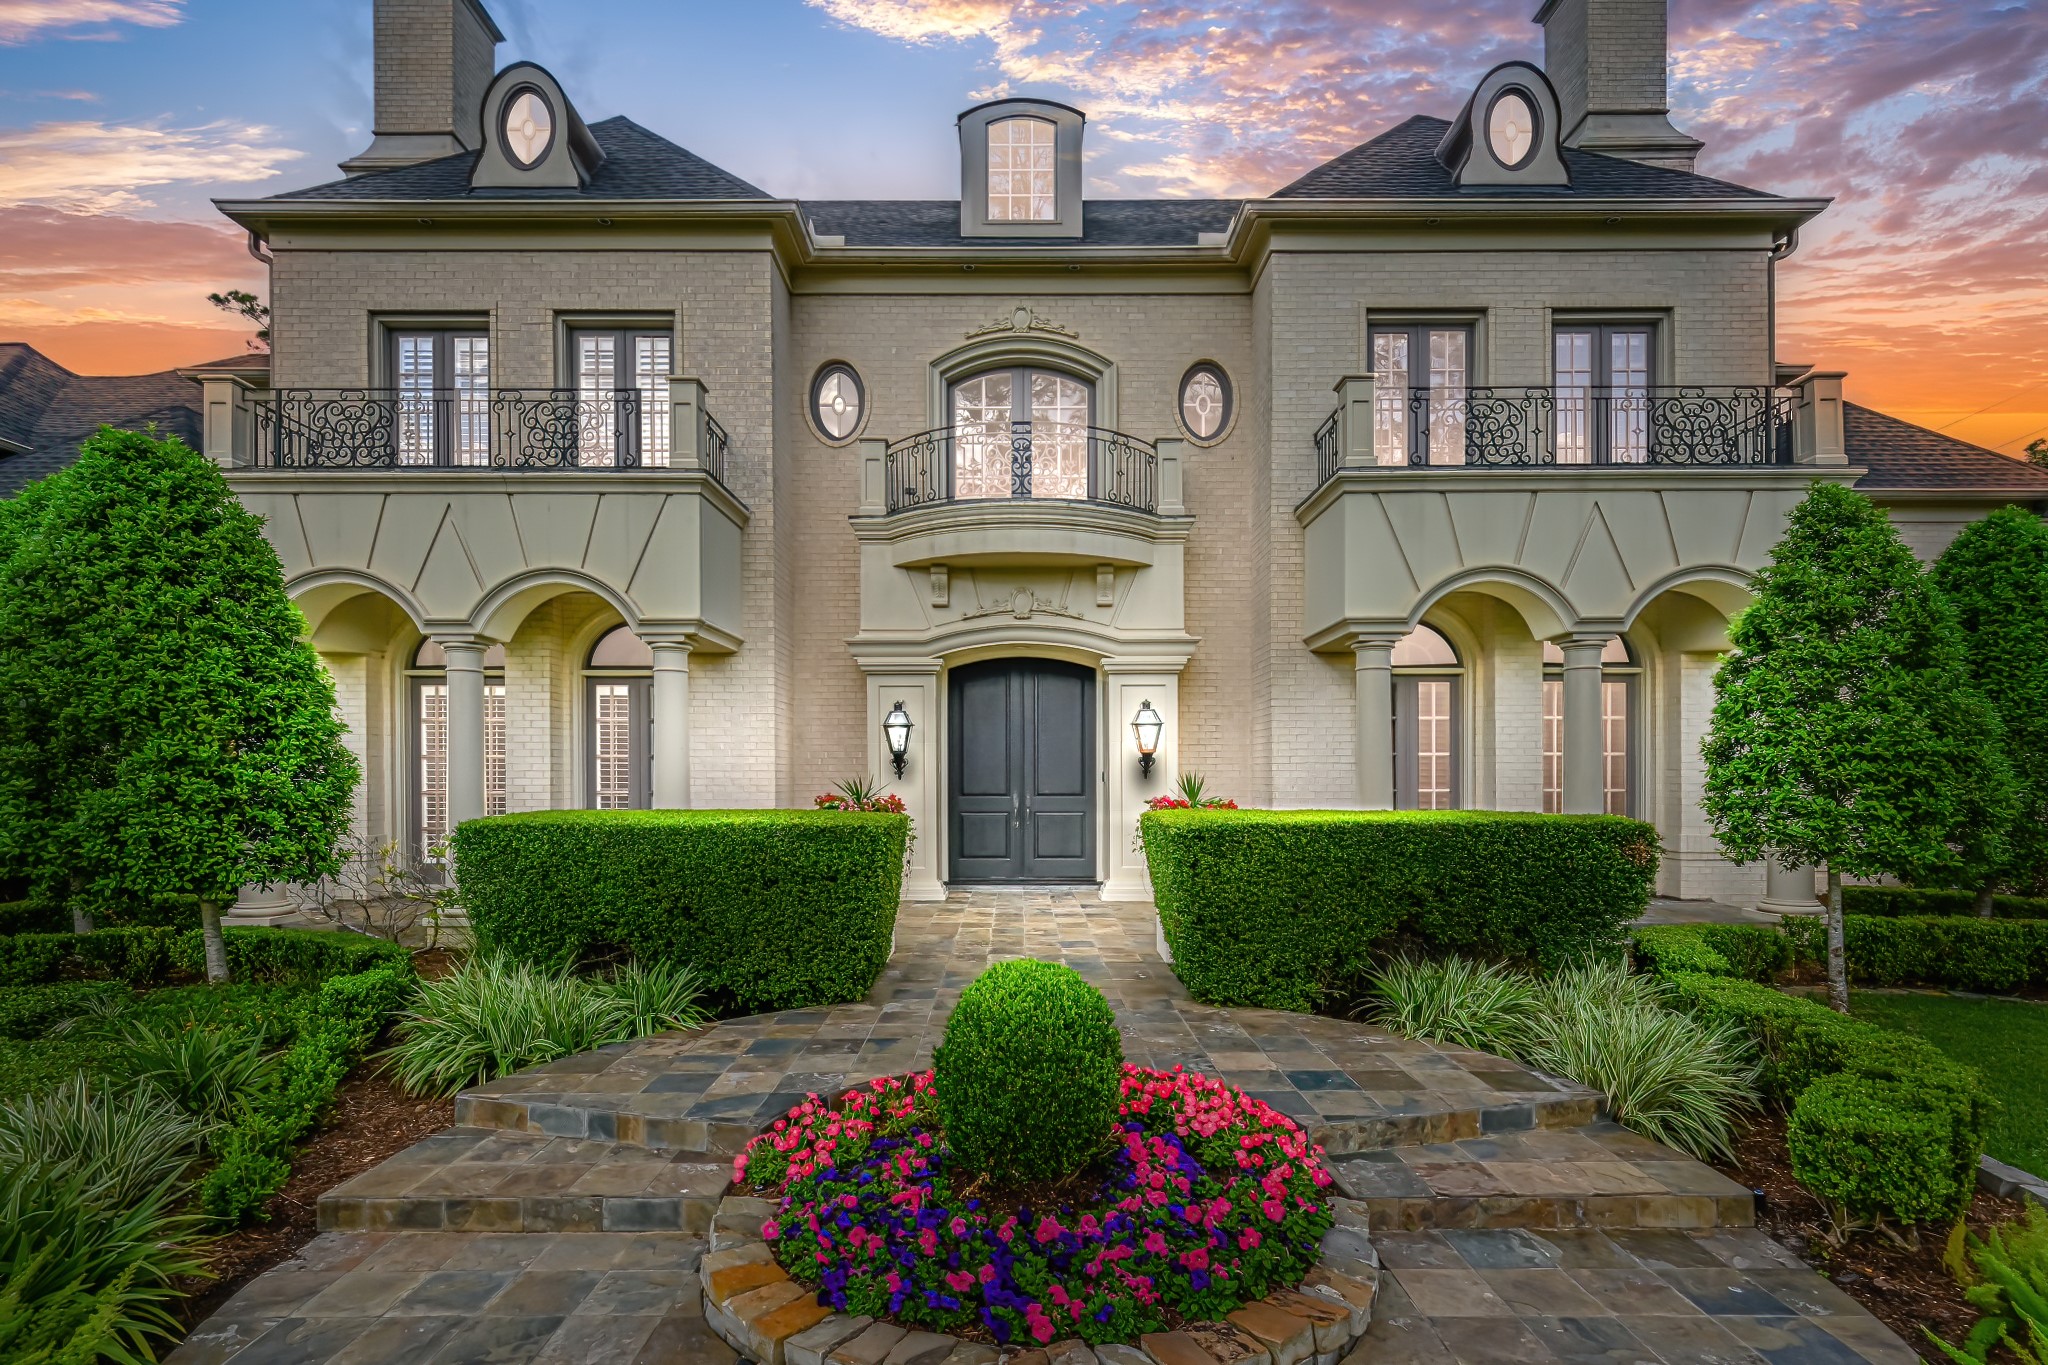 Stately facade, elegant and gracious formal landscaping ideally situated on over 36,000 square feet in coveted Hunters Creek Village.